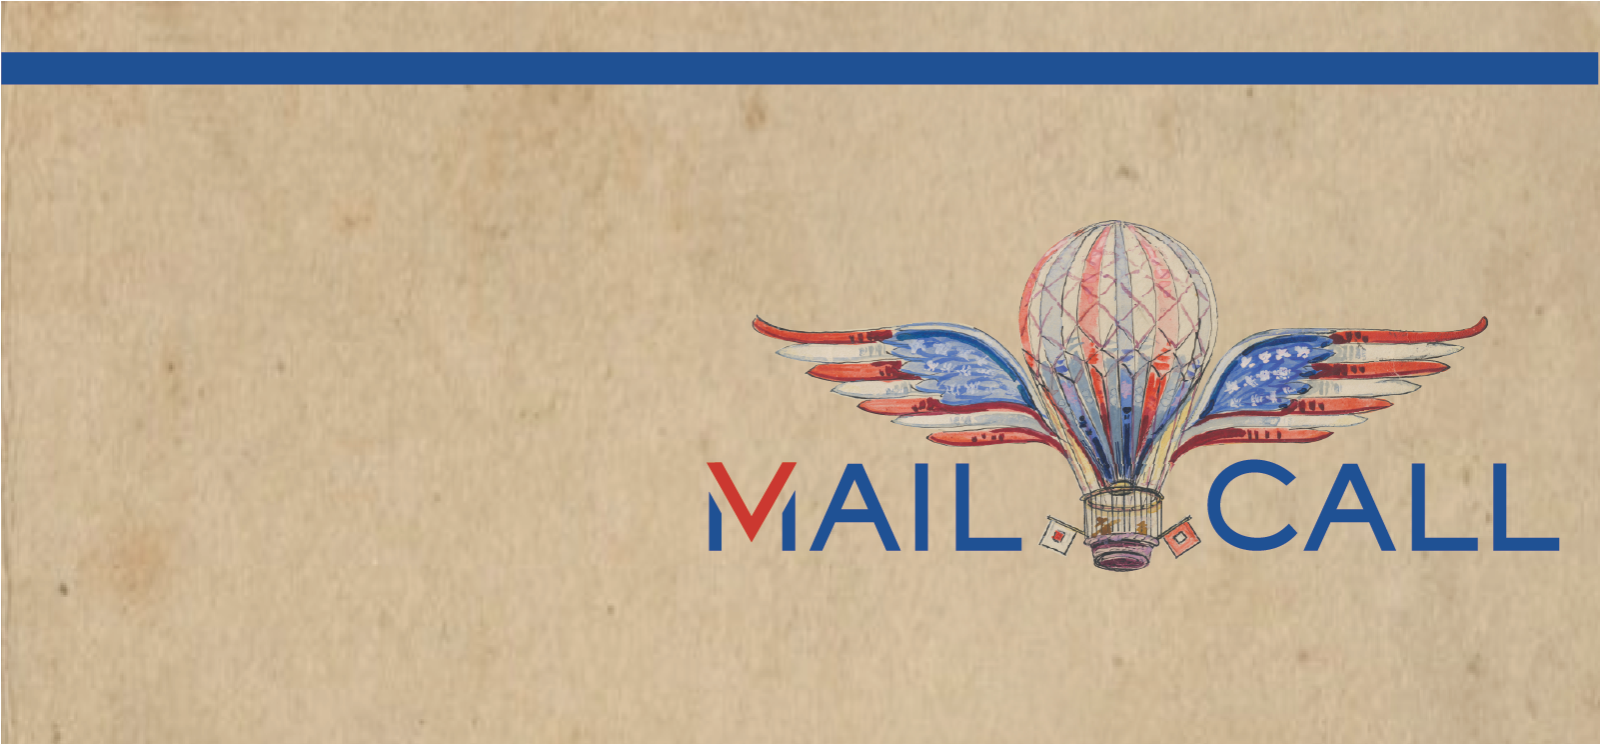 Background: creamy vintage paper texture. Image: Painting of a red/white/blue hot air balloon with U.S. flags for wings. Text: 'Mail Call'